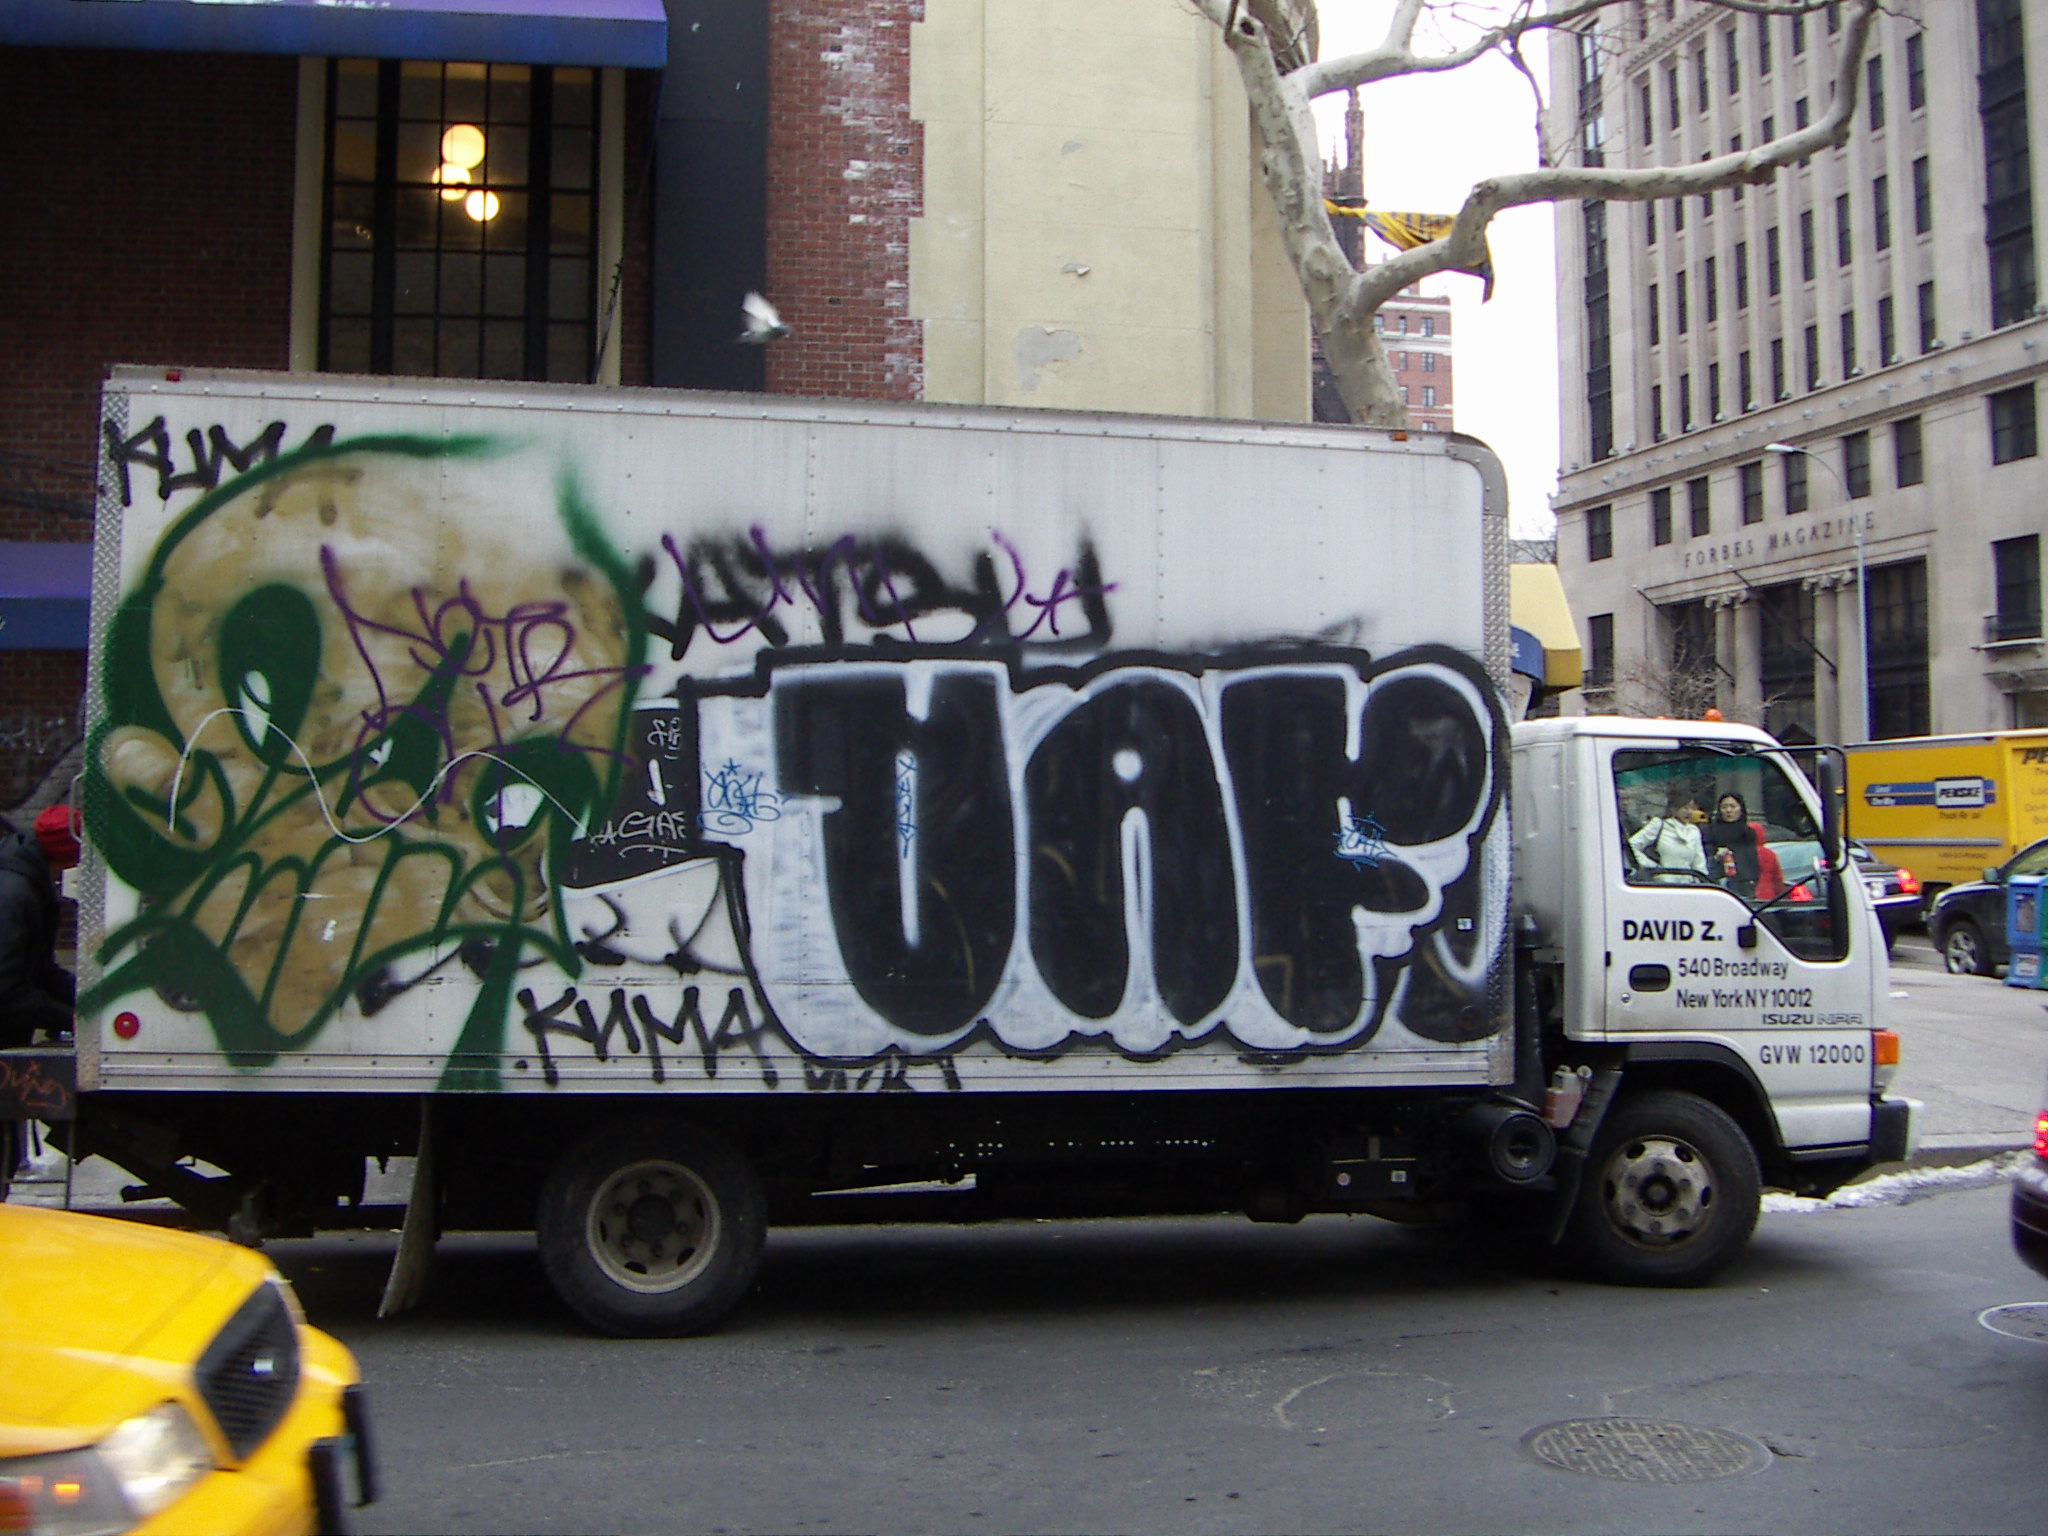 the truck is driving down the street with grafitti on it